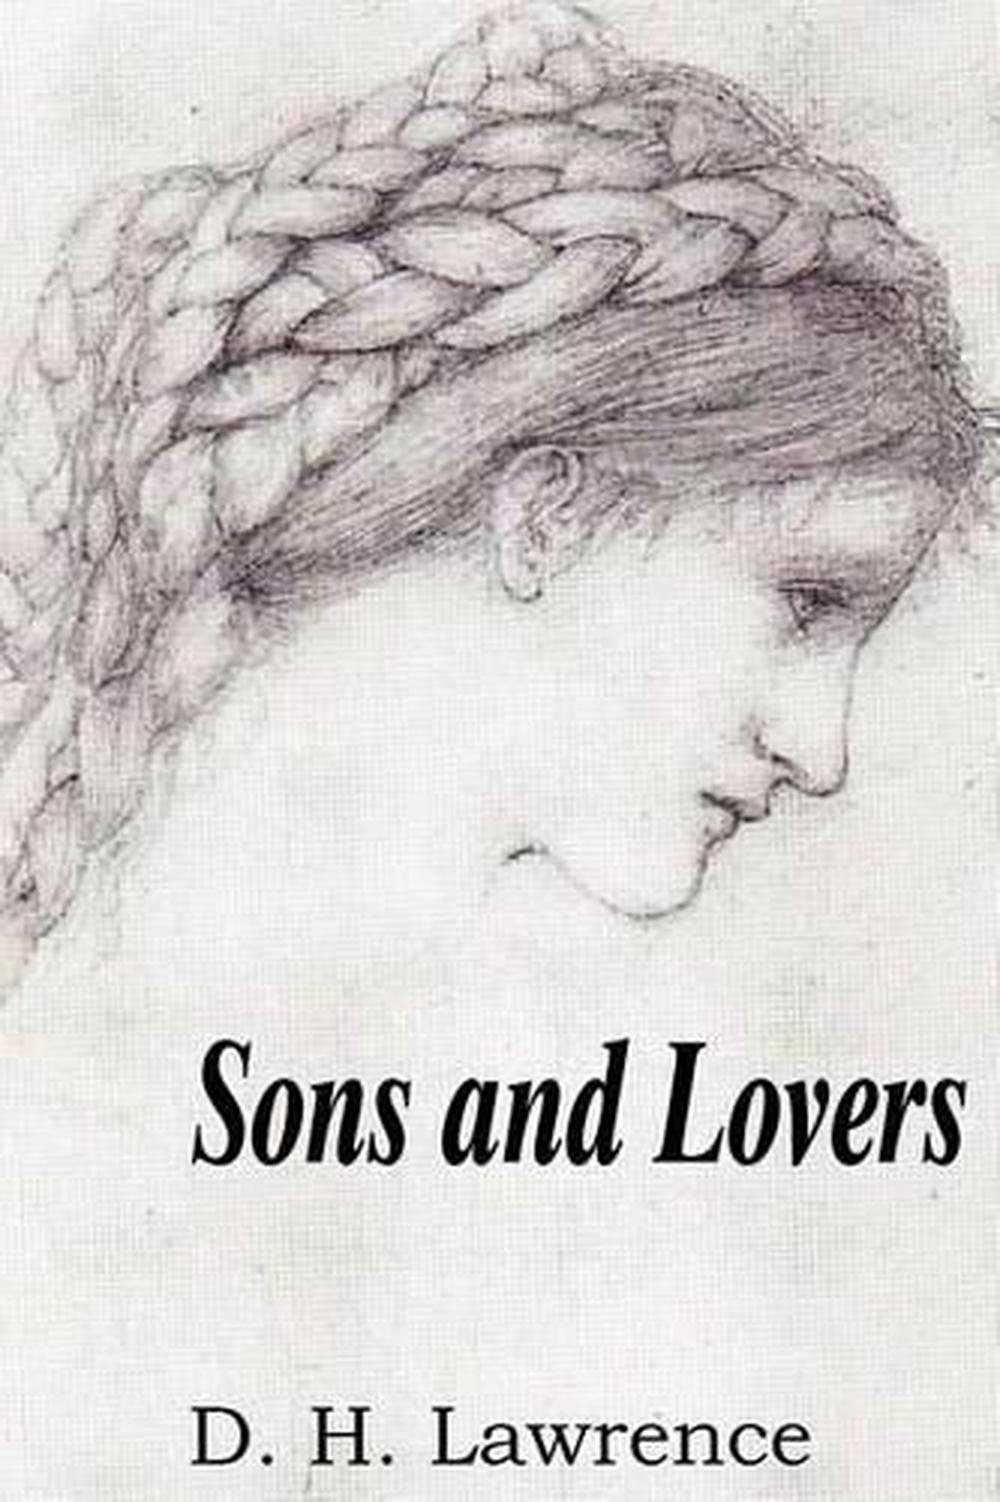 sons & lovers by dh lawrence